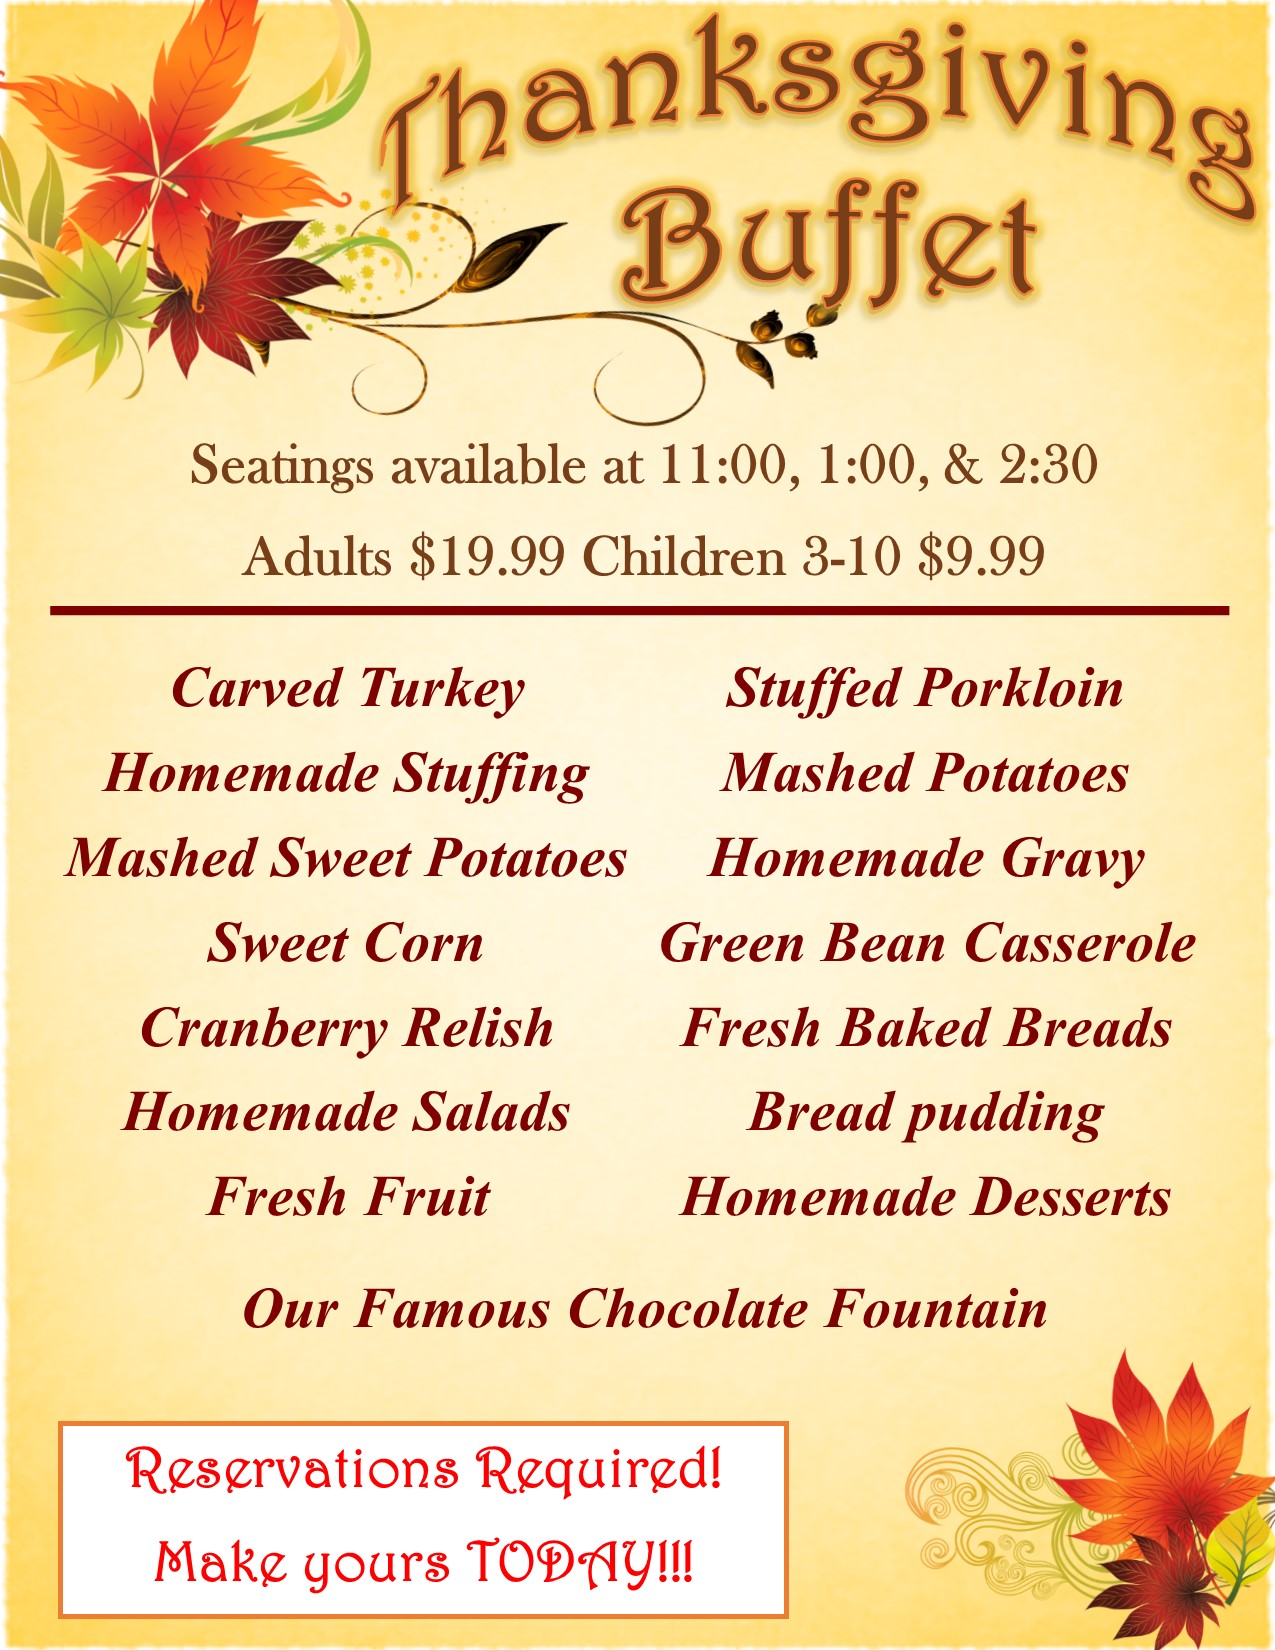 The Rafters Restaurant Catering & Events – Your Destination for Great ...